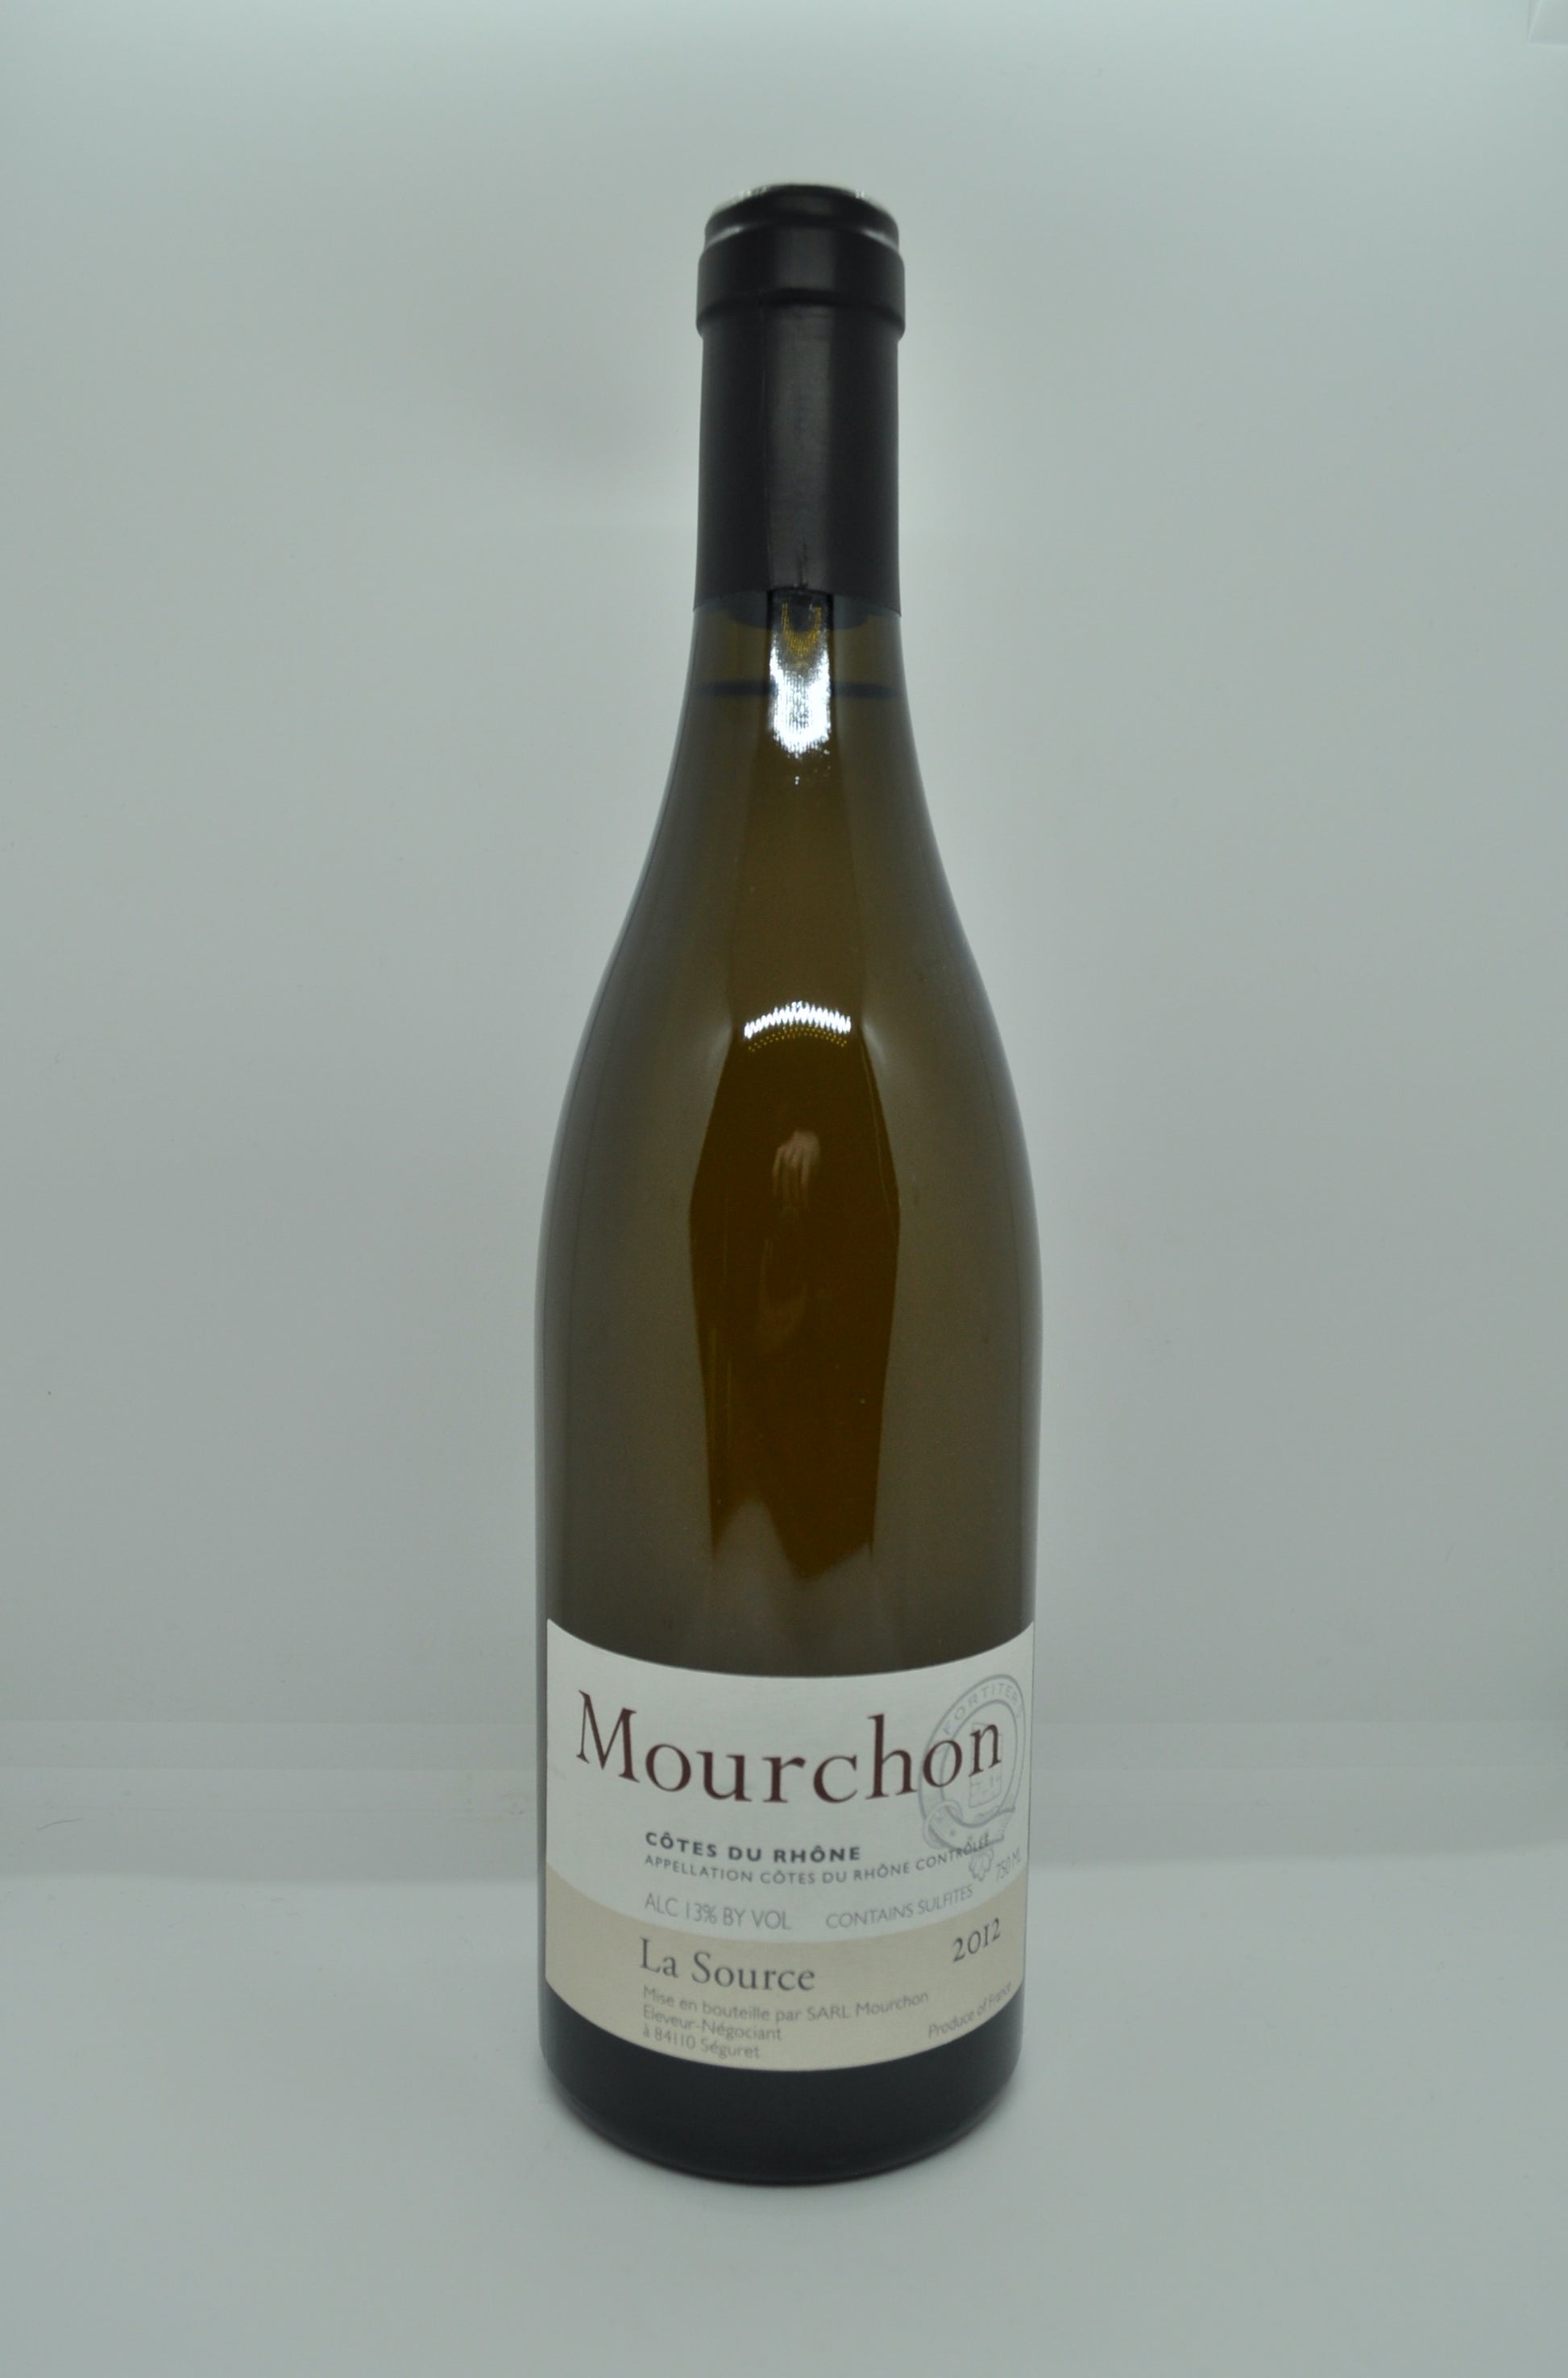 2012 vintage white wine. Mourchon La Source Cote du Rhone Blanc 2012. France Rhone. Immediate delivery. Free local delivery. Gift wrapping available.